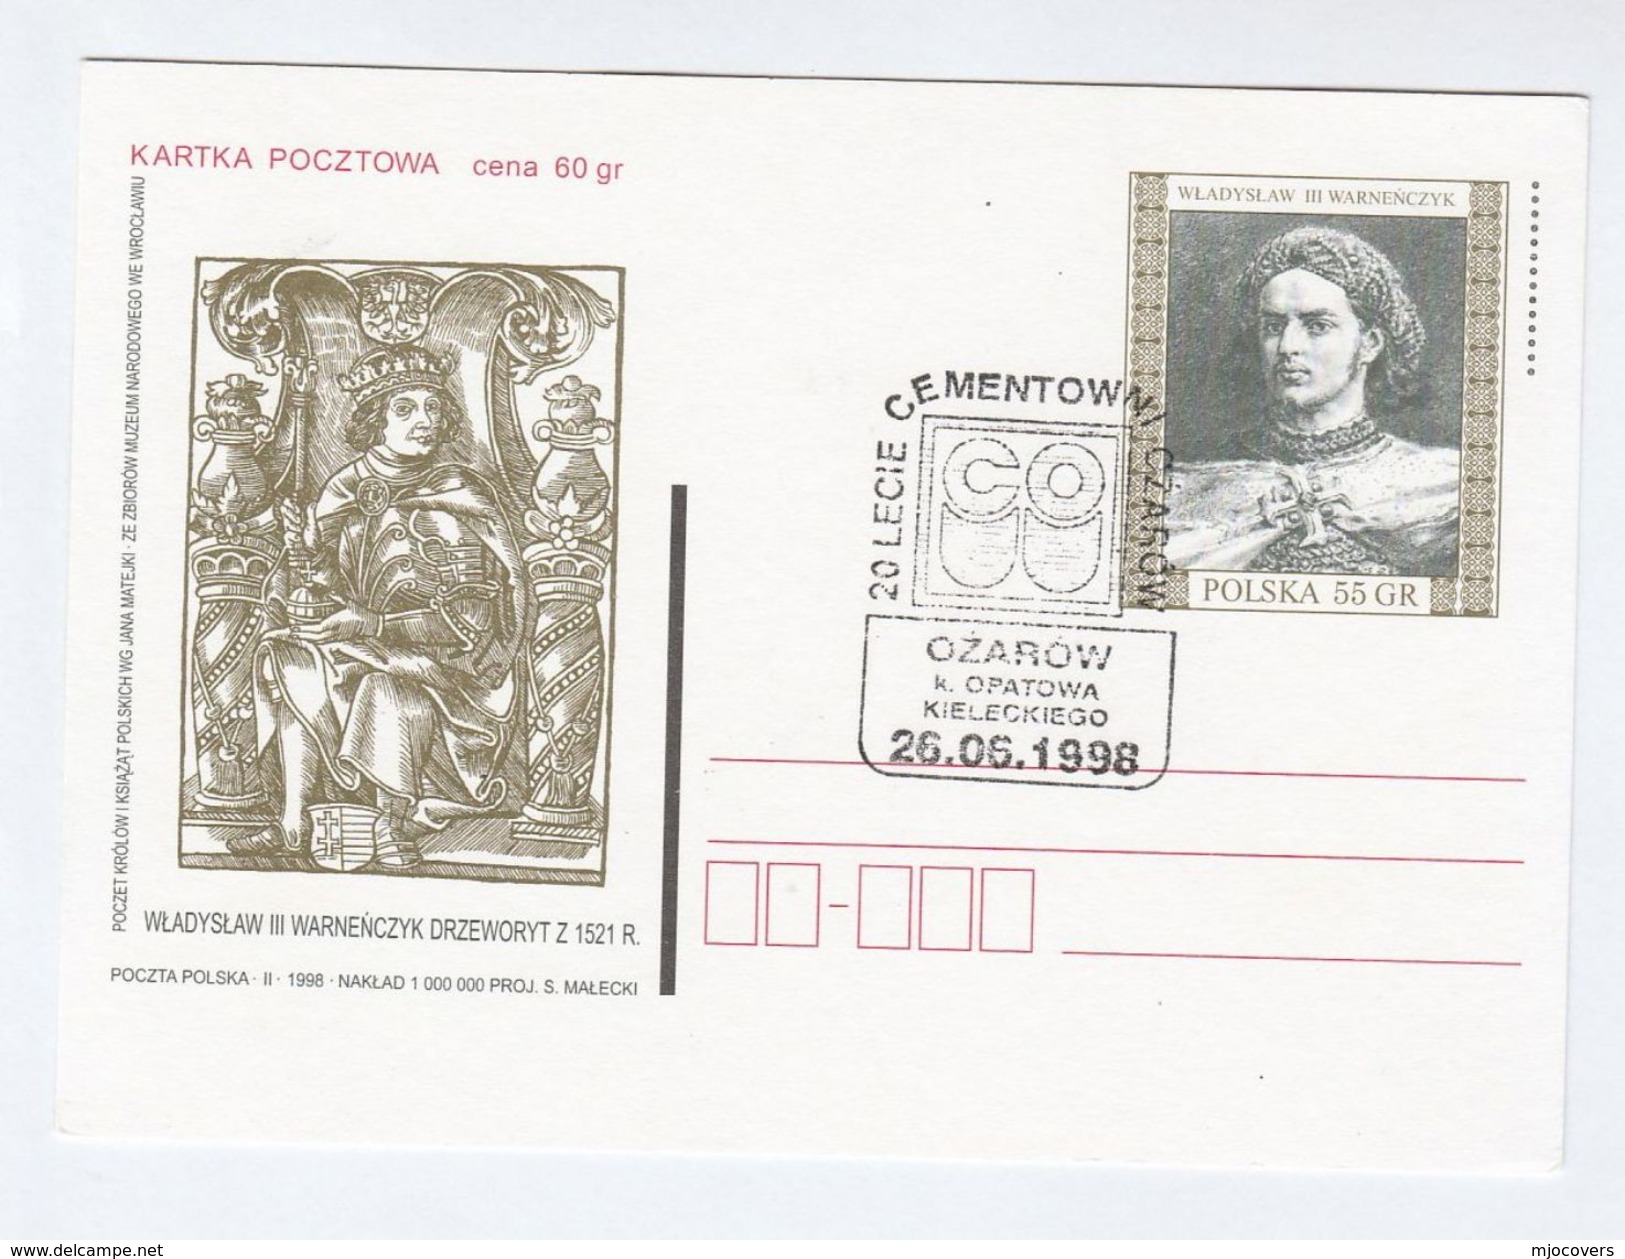 1998 Poland CEMENT PLANT CEMENTOWNI OZAROW  20th ANNIV EVENT COVER Postal Stationery Card Wladyslaw III Minerals Stamps - Minerals